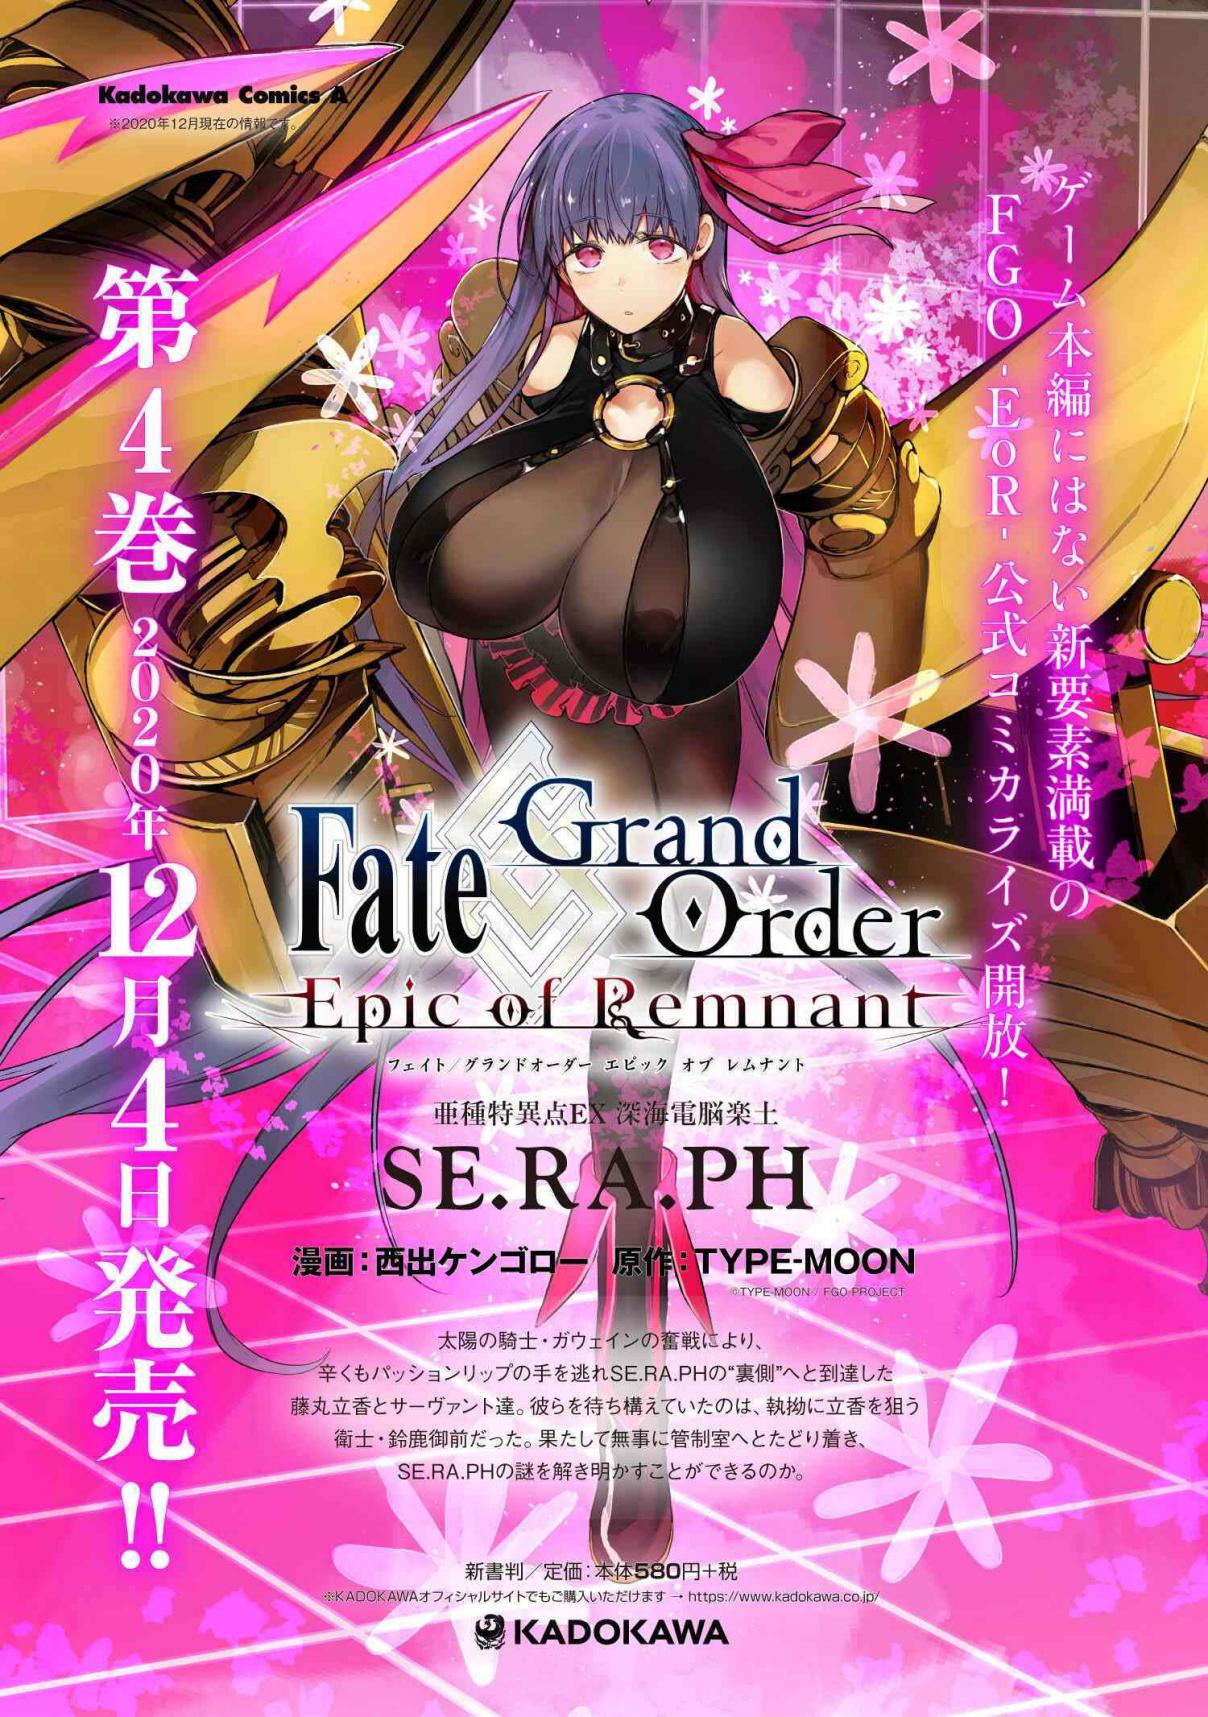 Fate/Grand Order -Epic of Remnant- Deep Sea Cyber-Paradise, SE.RA.PH 19.2